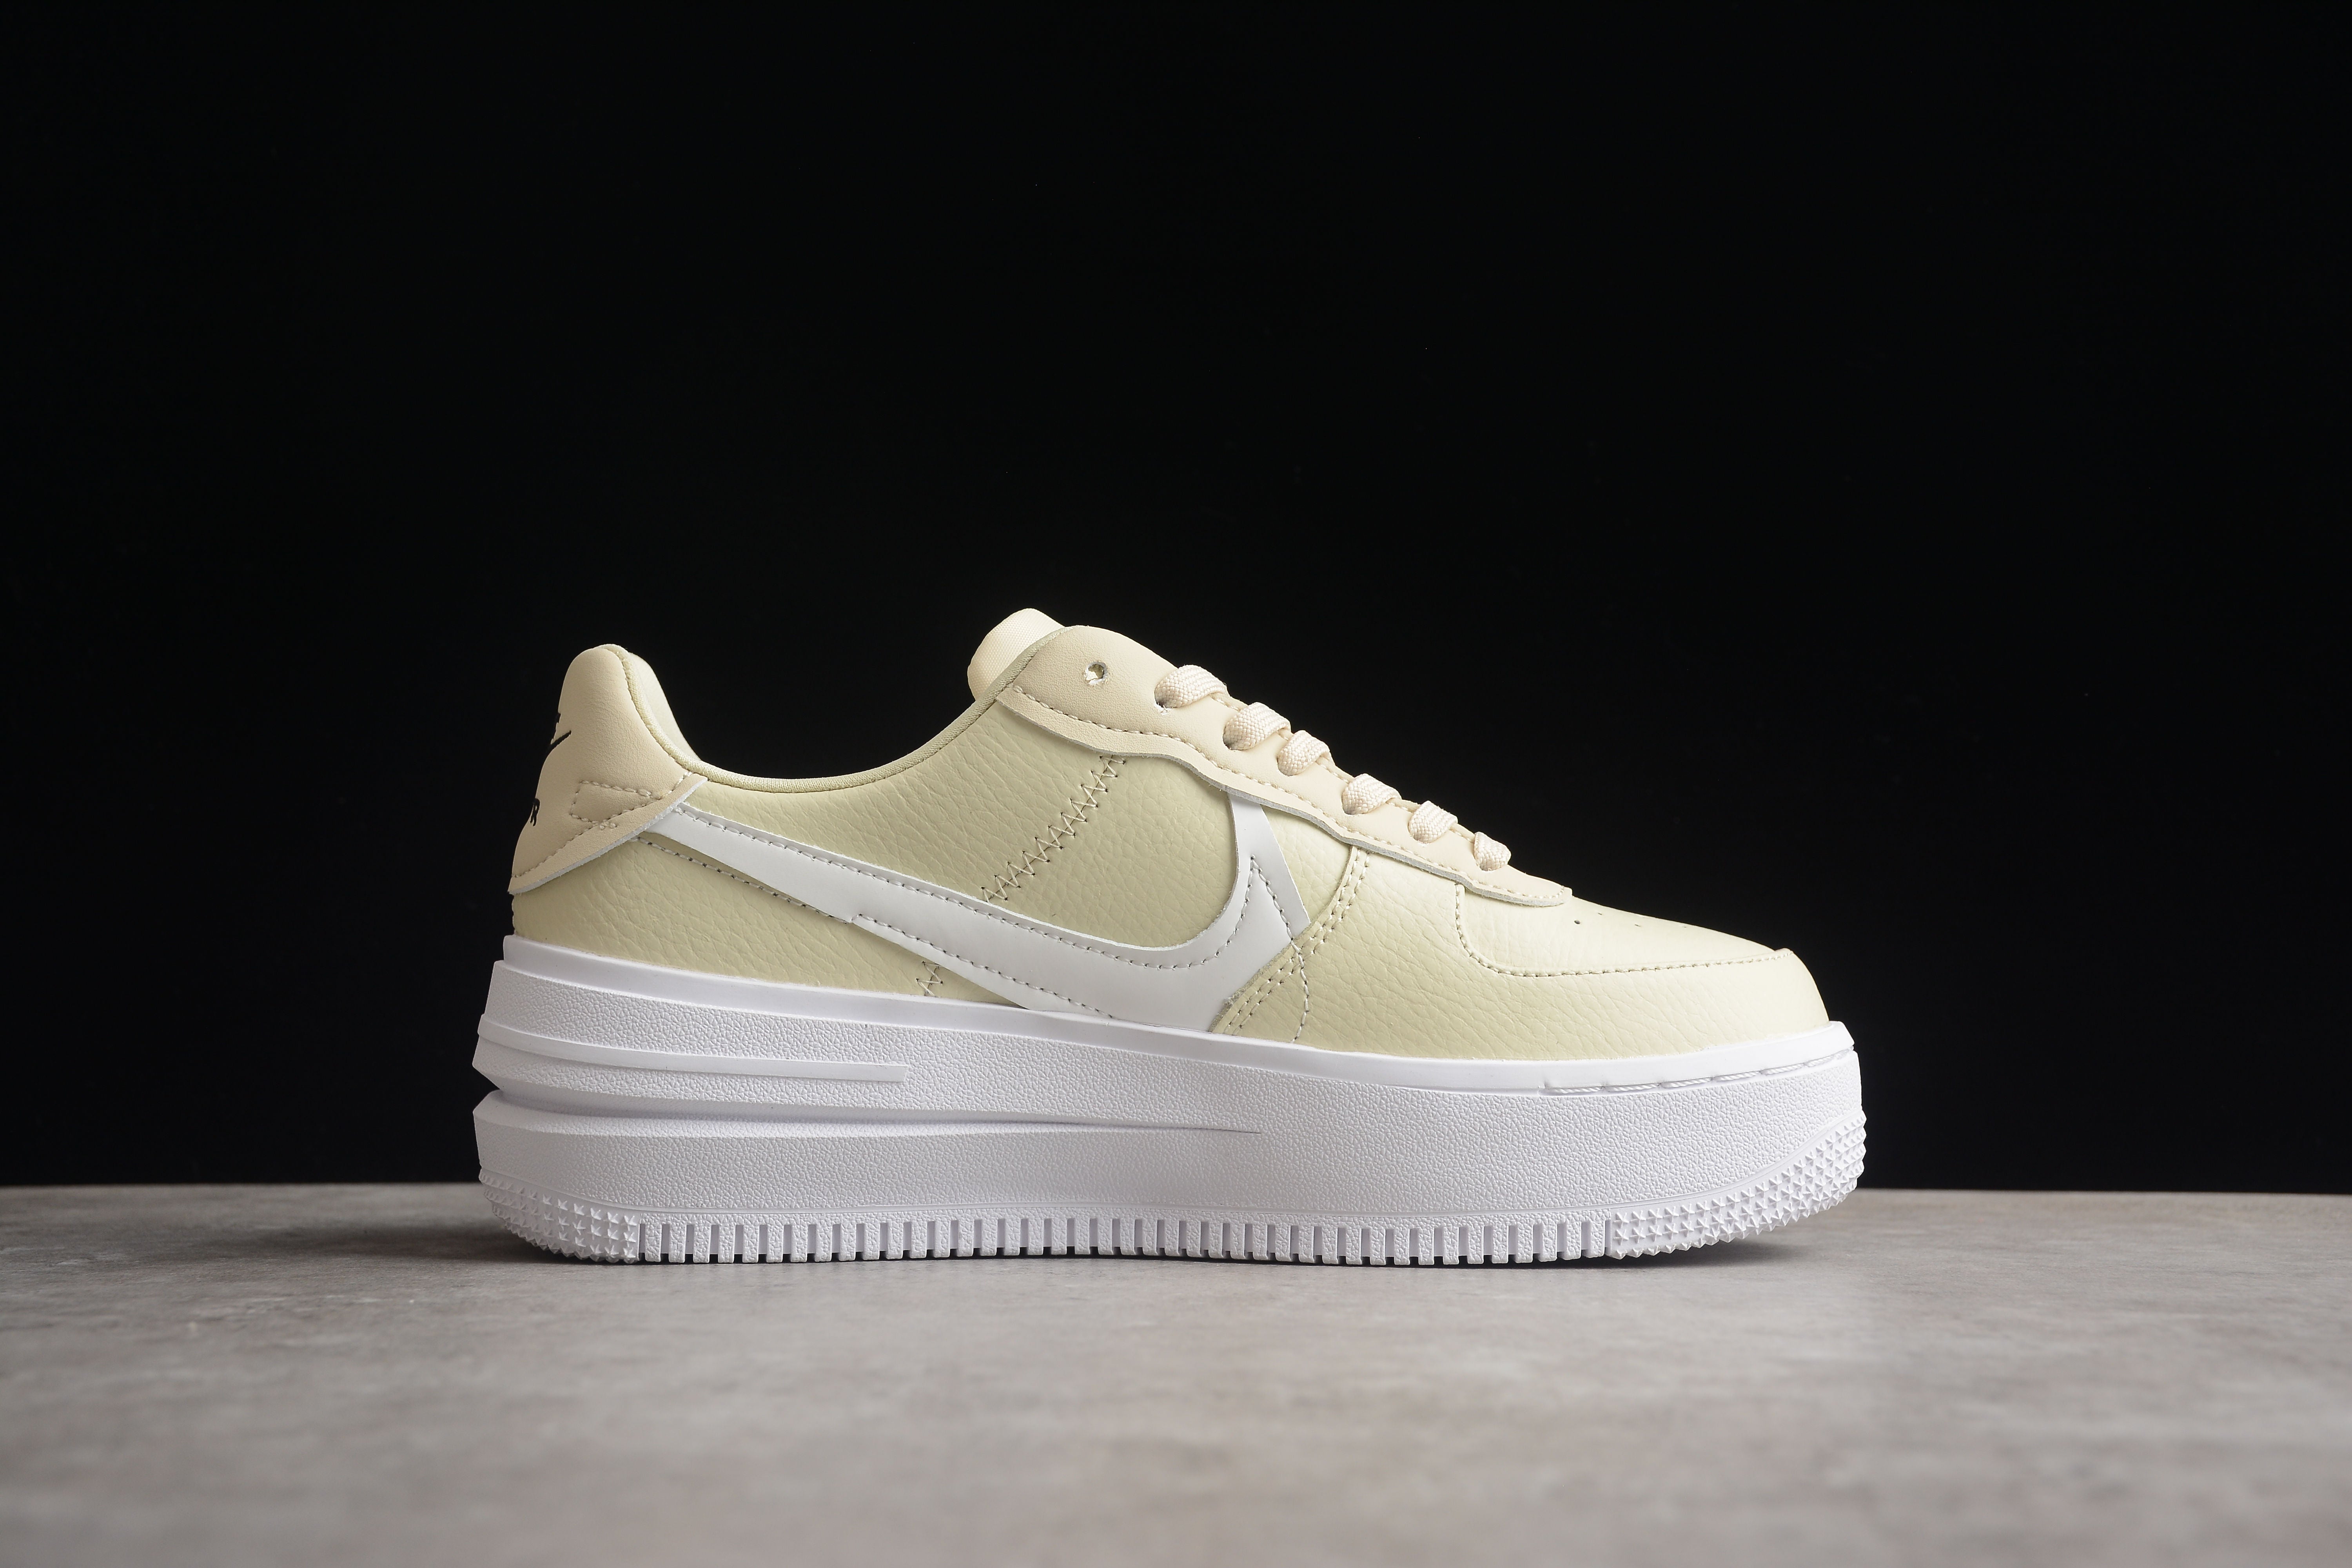 Nike airforce A1 beige shoes